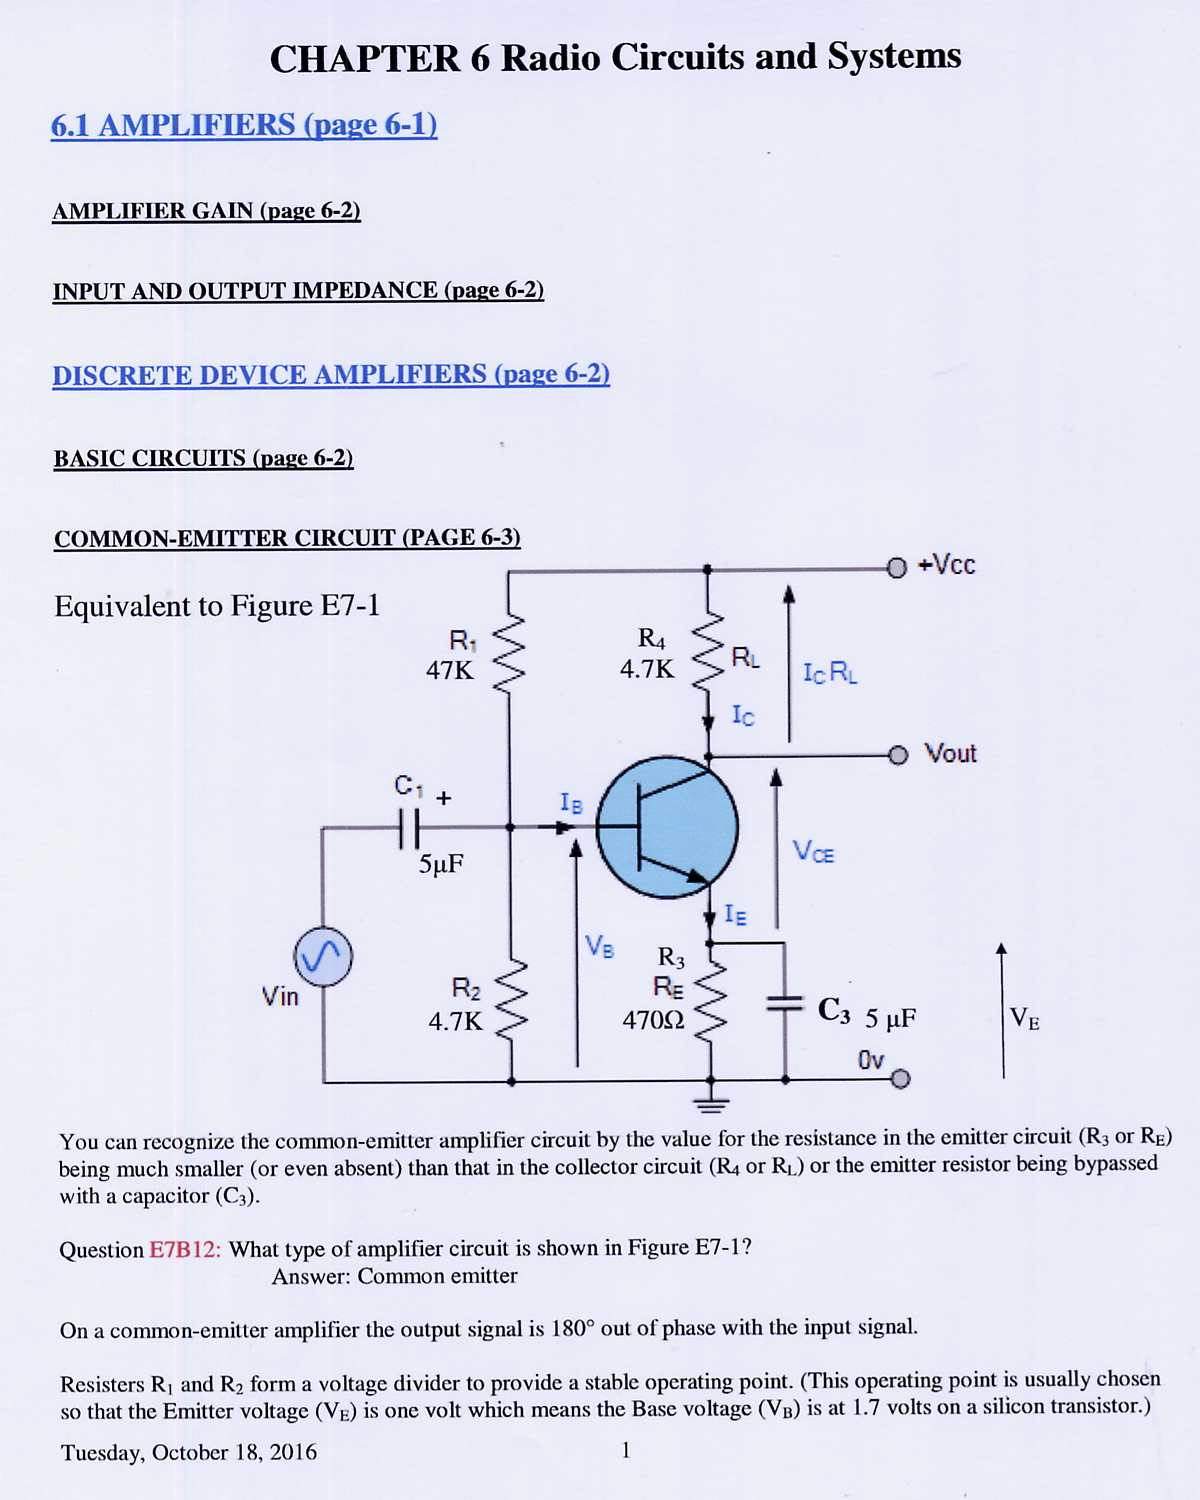 Chapter 6 Radio Circuits and Systems - Pages 6-1 through 6-48